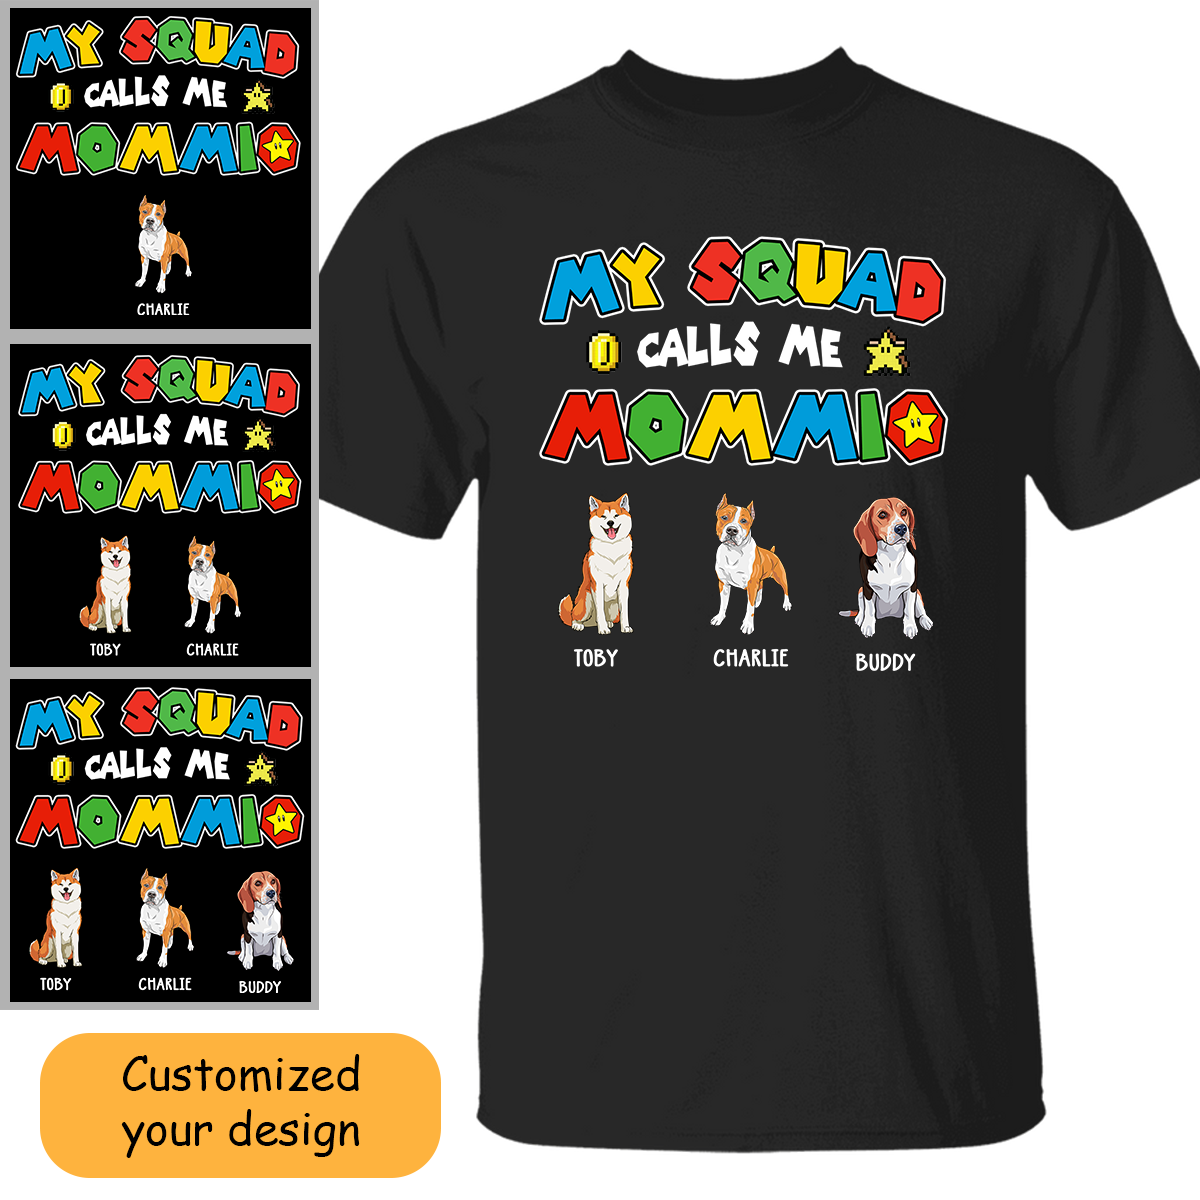 Customized Dog Mom Shirt Hoodie My Squad Calls Me Mommio For Mom, For Wife, For Mother, Grandma, Mother's Day Gift, For Dog Lovers